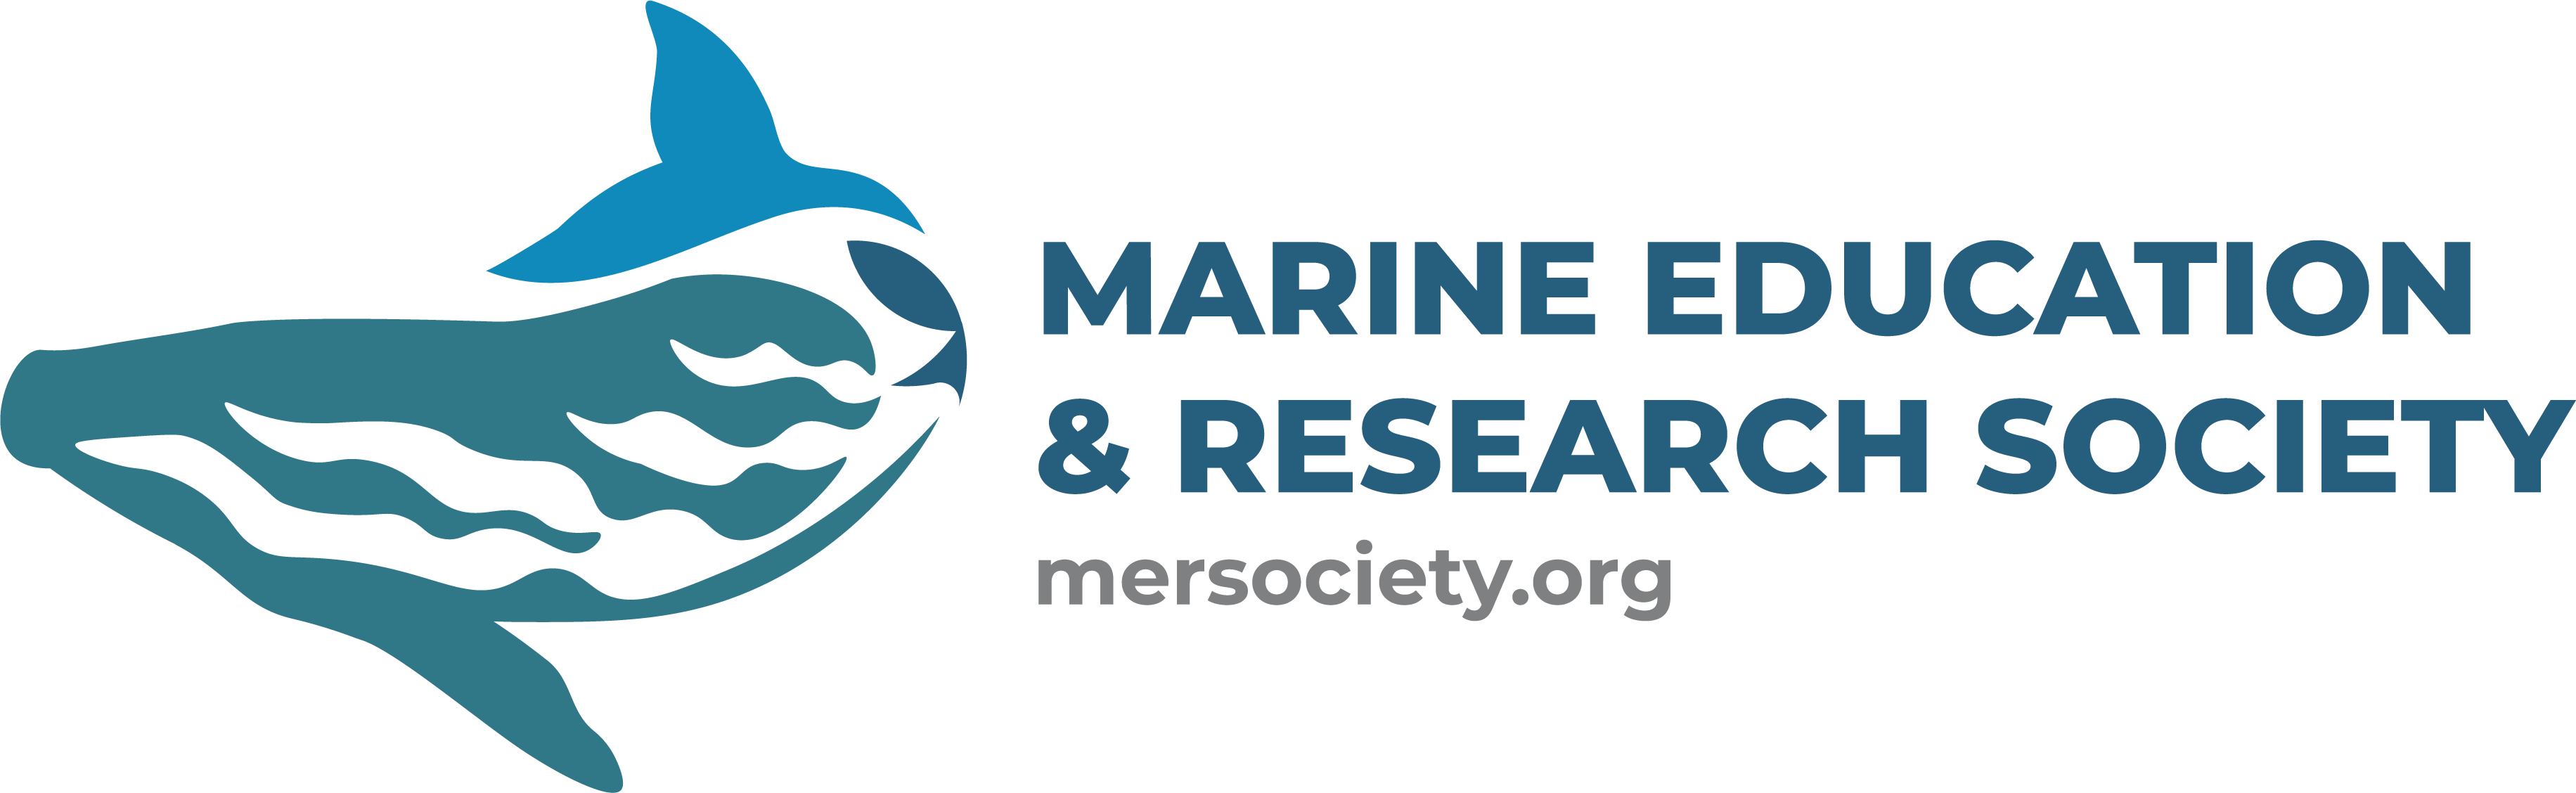 Marine Education and Research Society logo